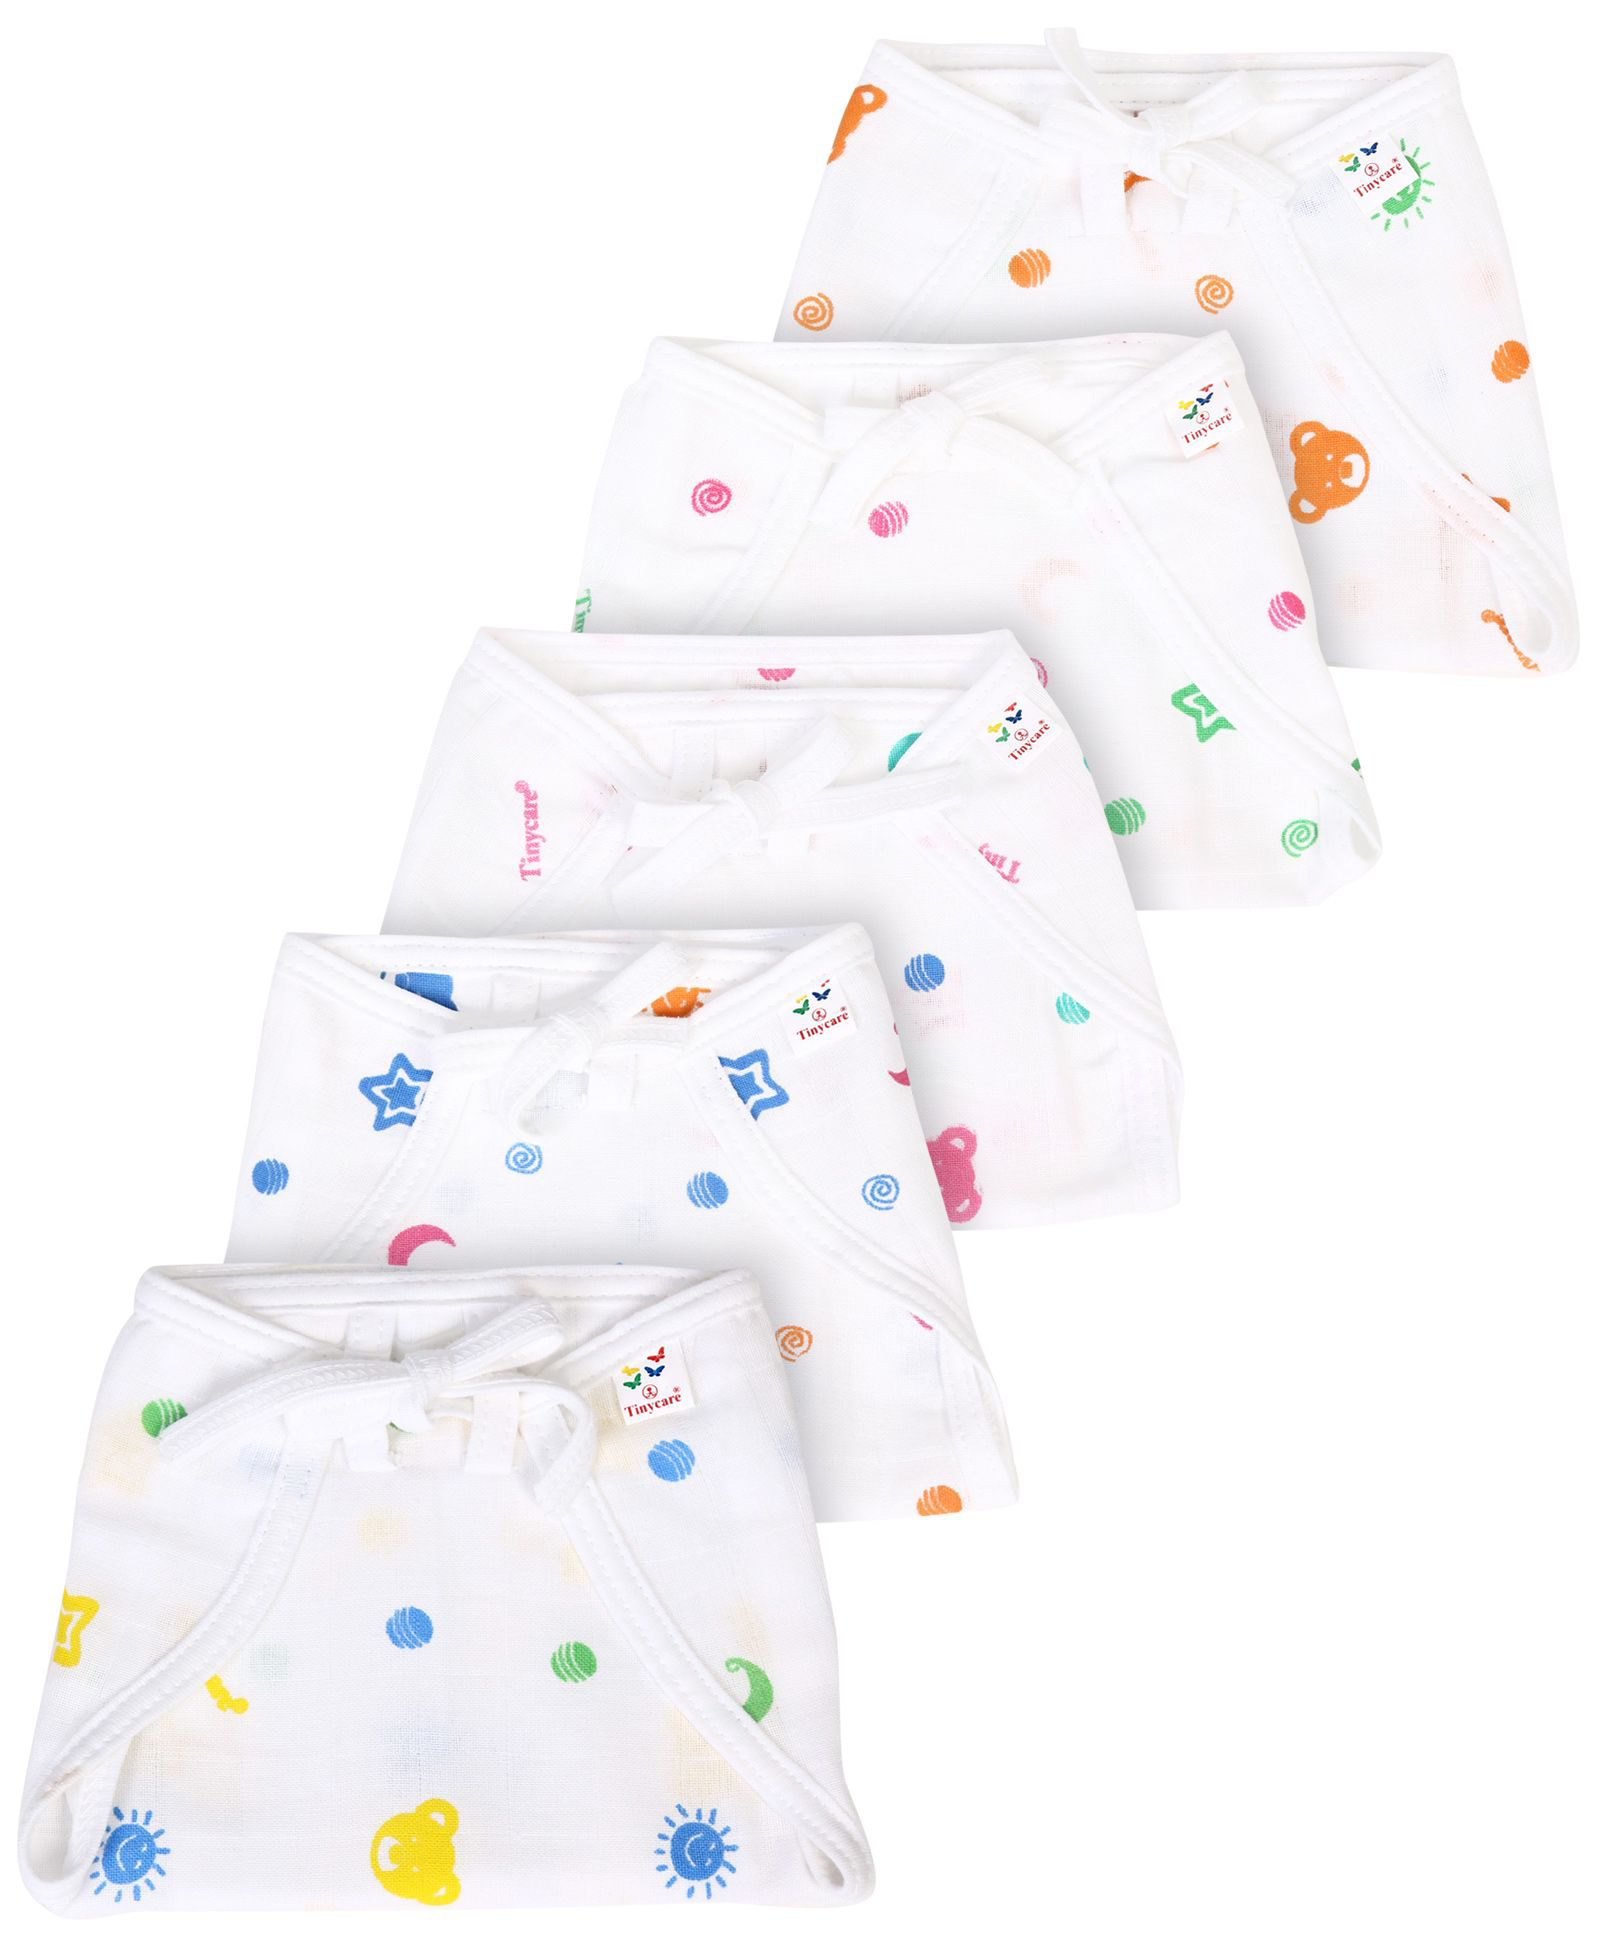 Tinycare - Baby Nappy with Cute Print